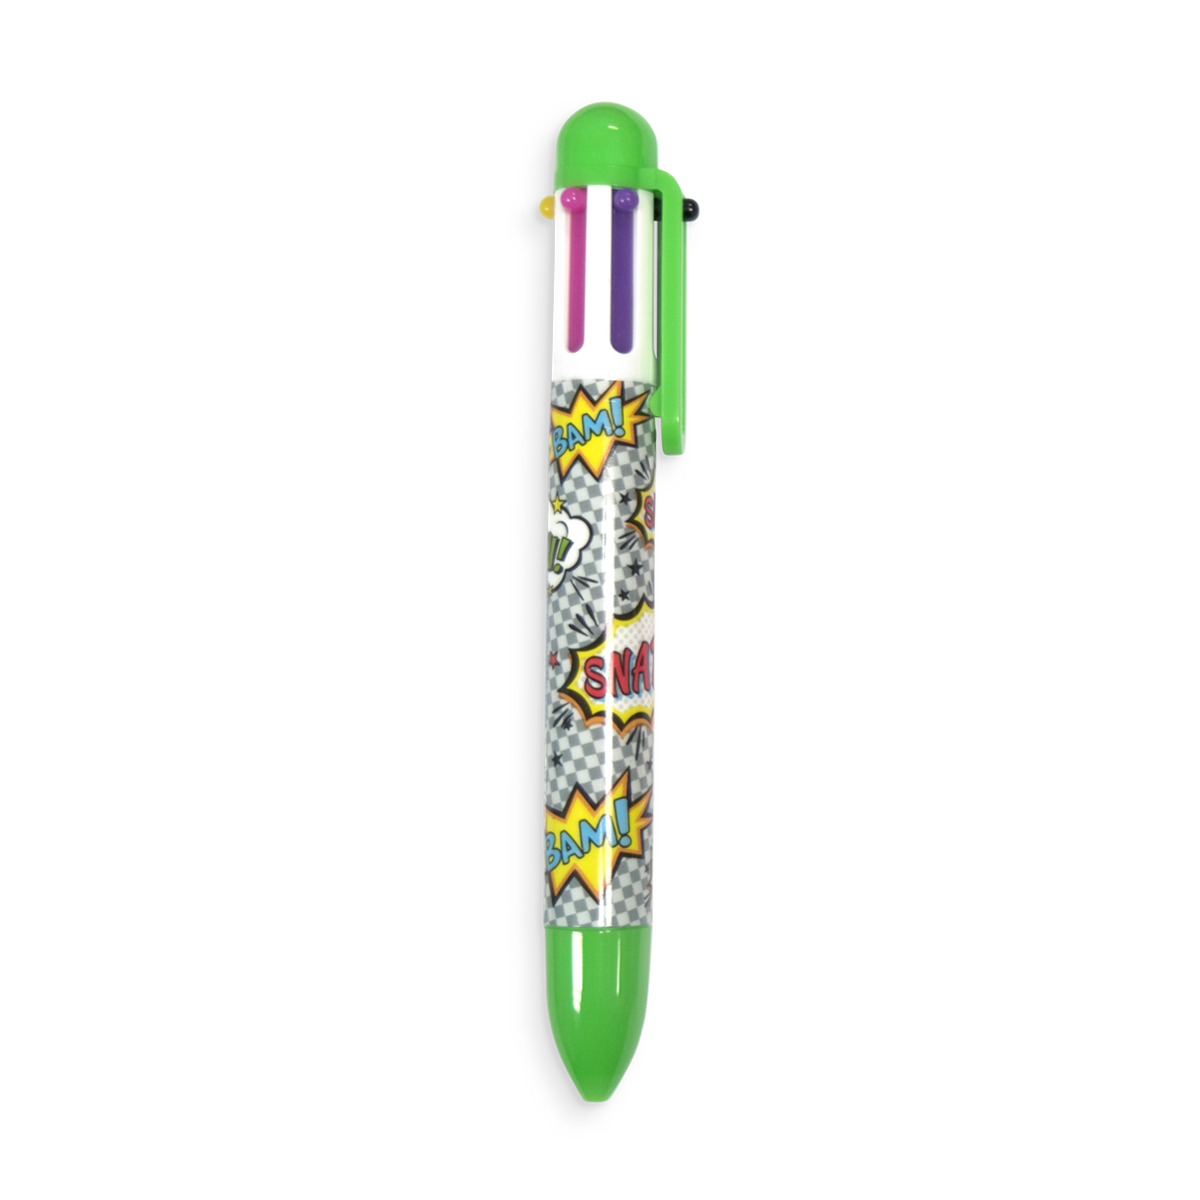 Monster 6 Click Multi Color Pens – Green Hippo Gifts